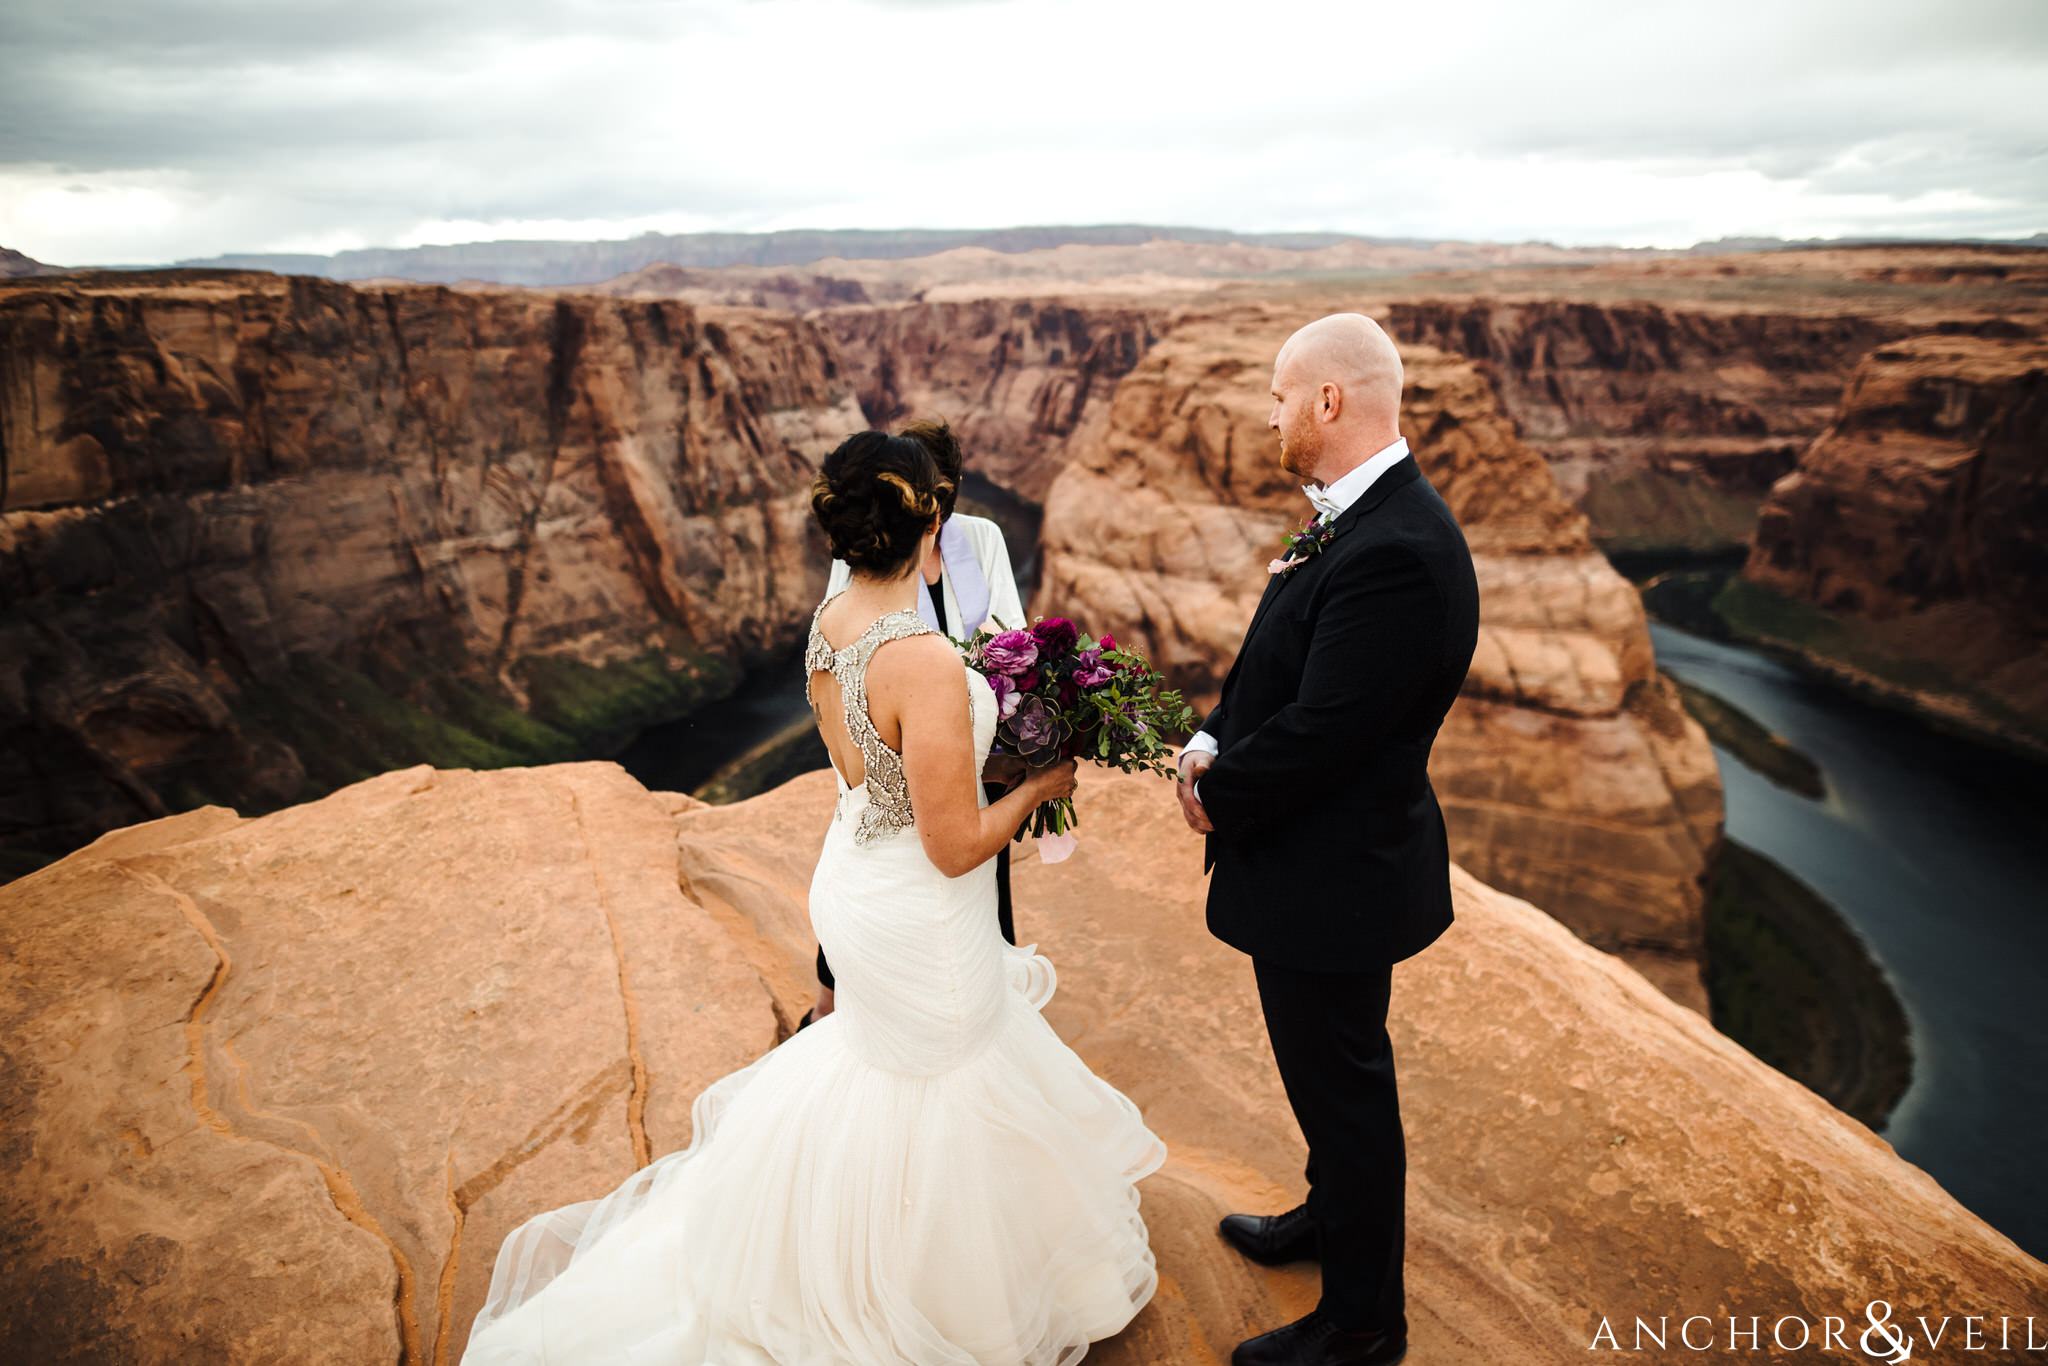 standing at the edge during their Horseshoe Bend Elopement Wedding